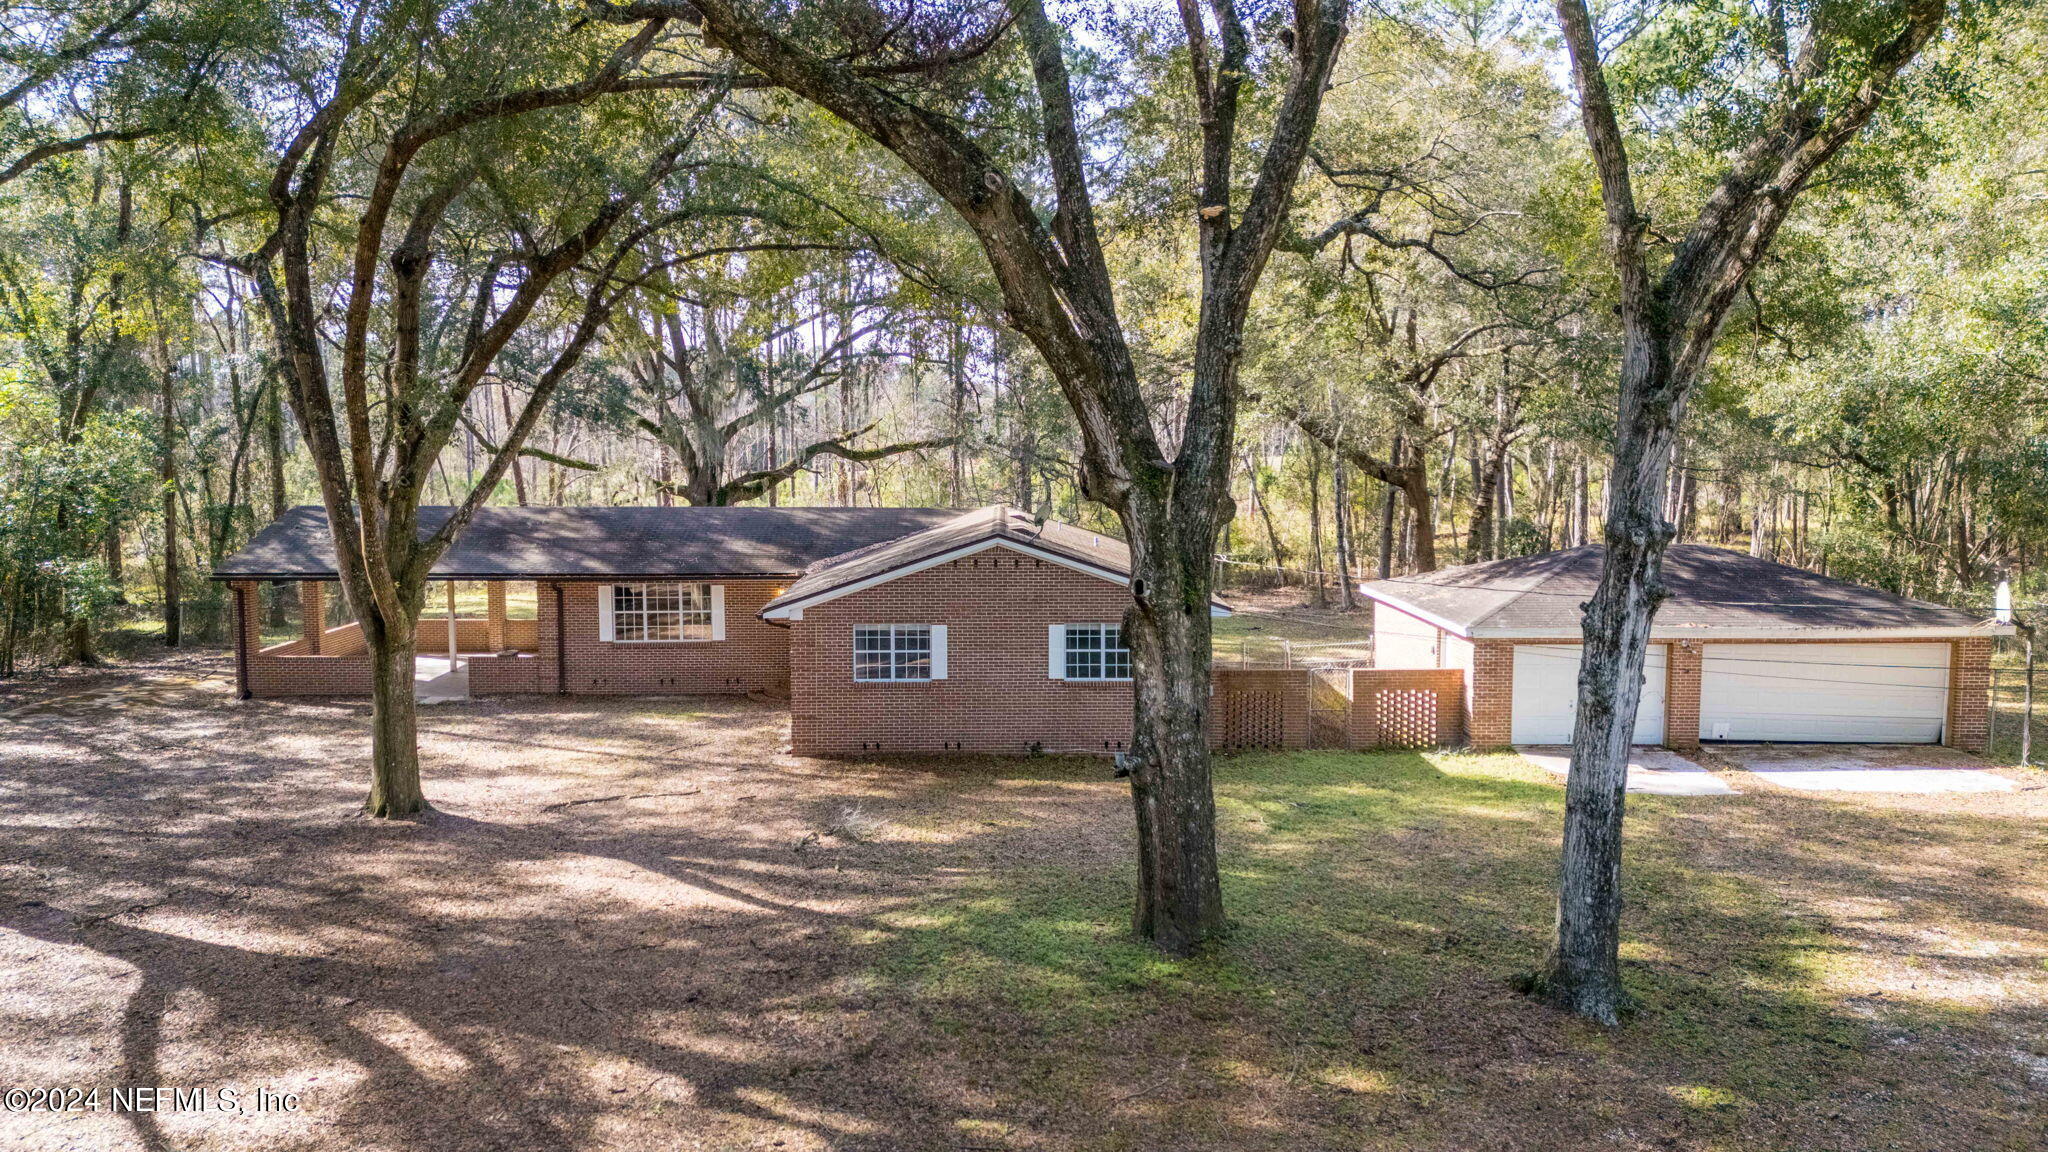 Middleburg, FL home for sale located at 1356 ALLIE MURRAY Road, Middleburg, FL 32068